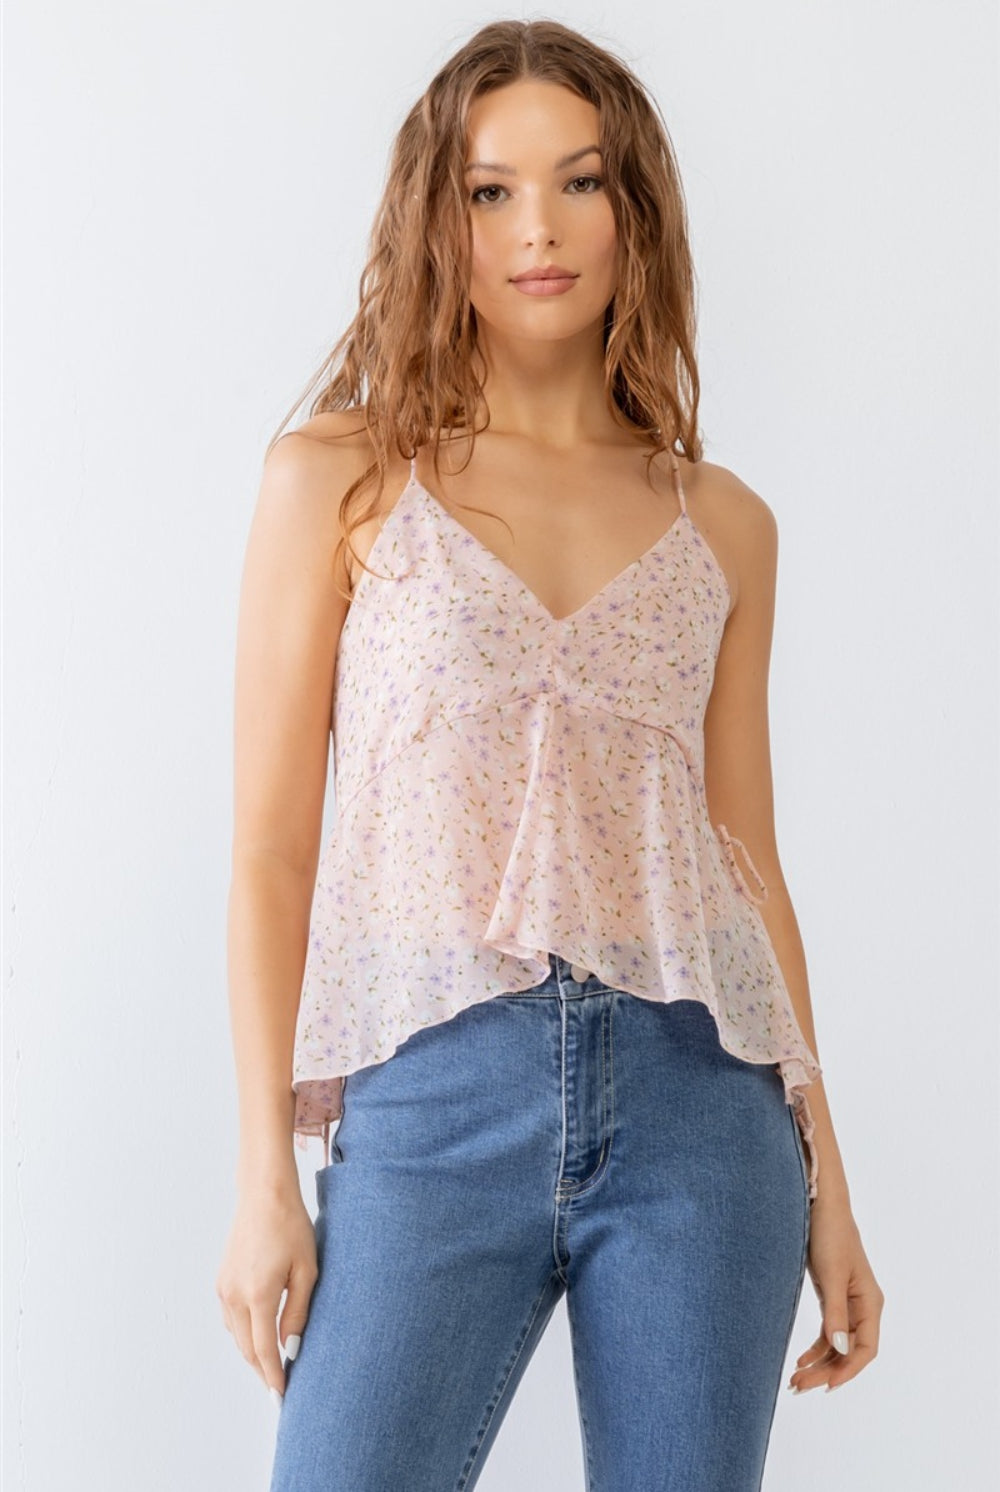 Elegant model wearing a light and airy lavender floral camisole top, ideal for a fresh spring look.